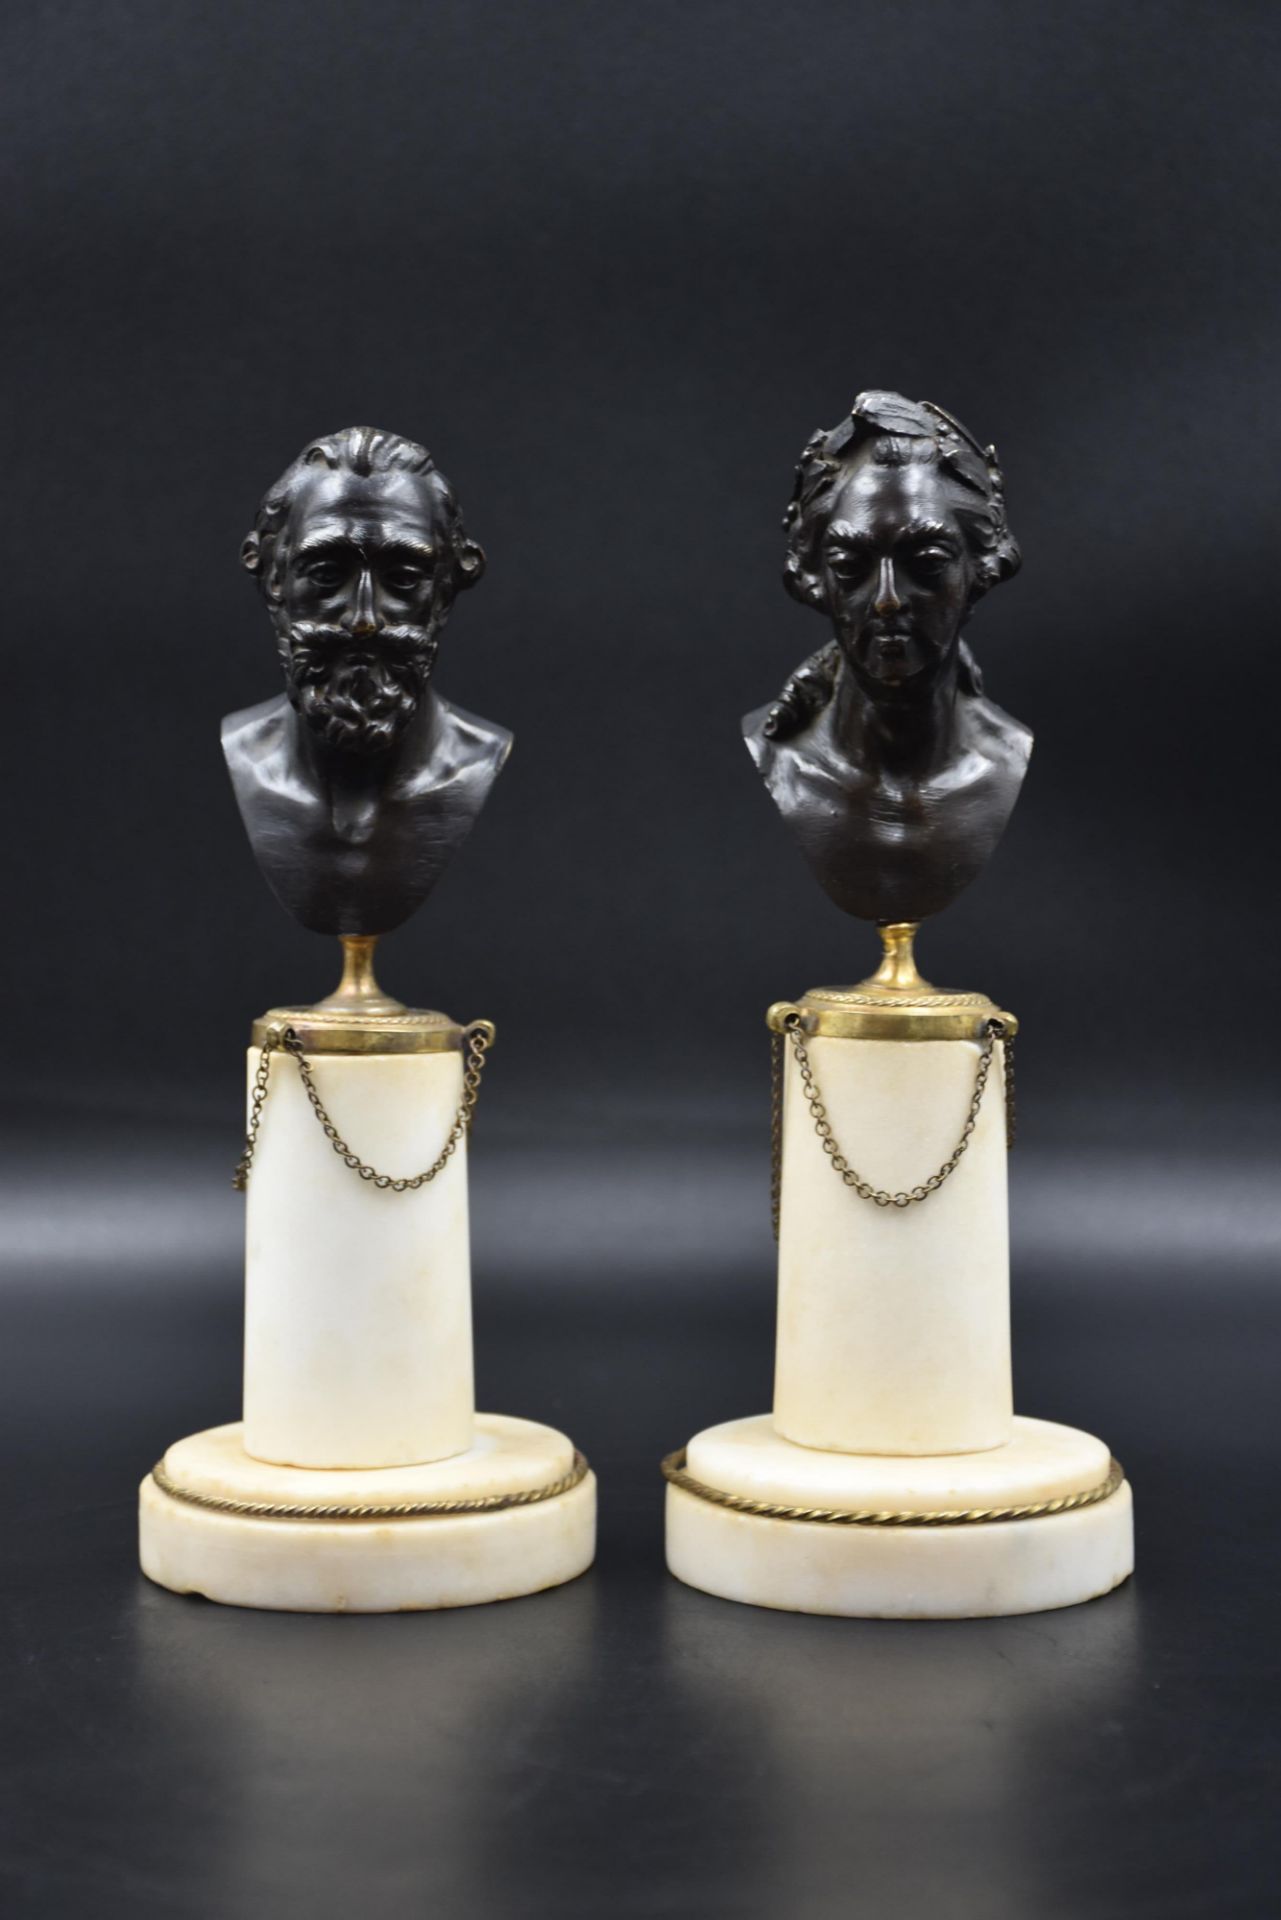 Pair of 18th century bronze busts, white marble bases representing Henry IV and an illustrious chara